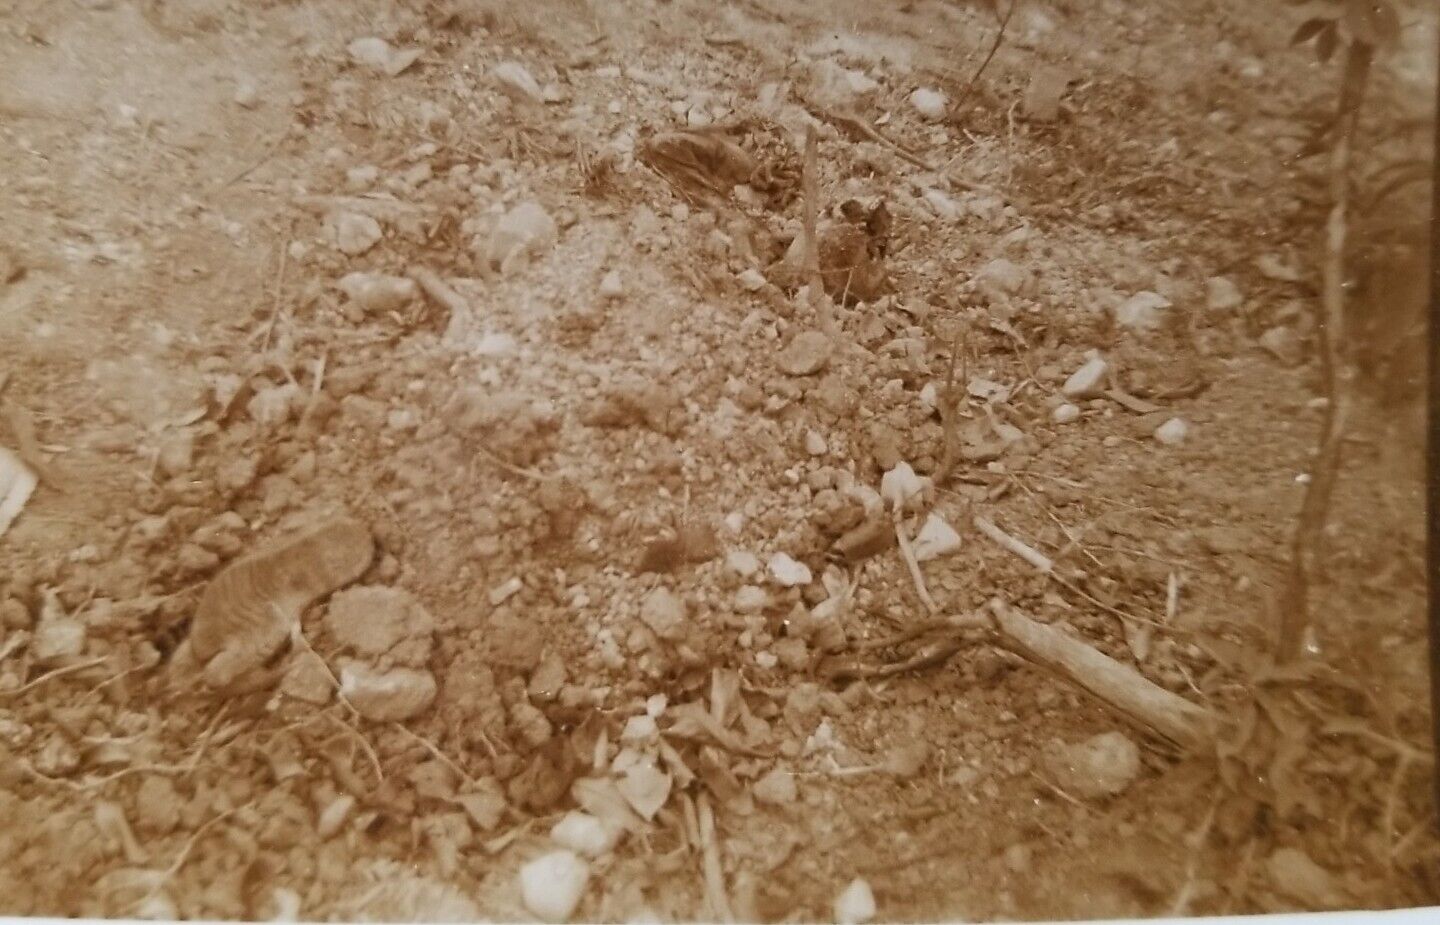 WW2 U.S. Soldiers PHOTO Of Shallow Grave With Shoe Sticking Out ~ Military 